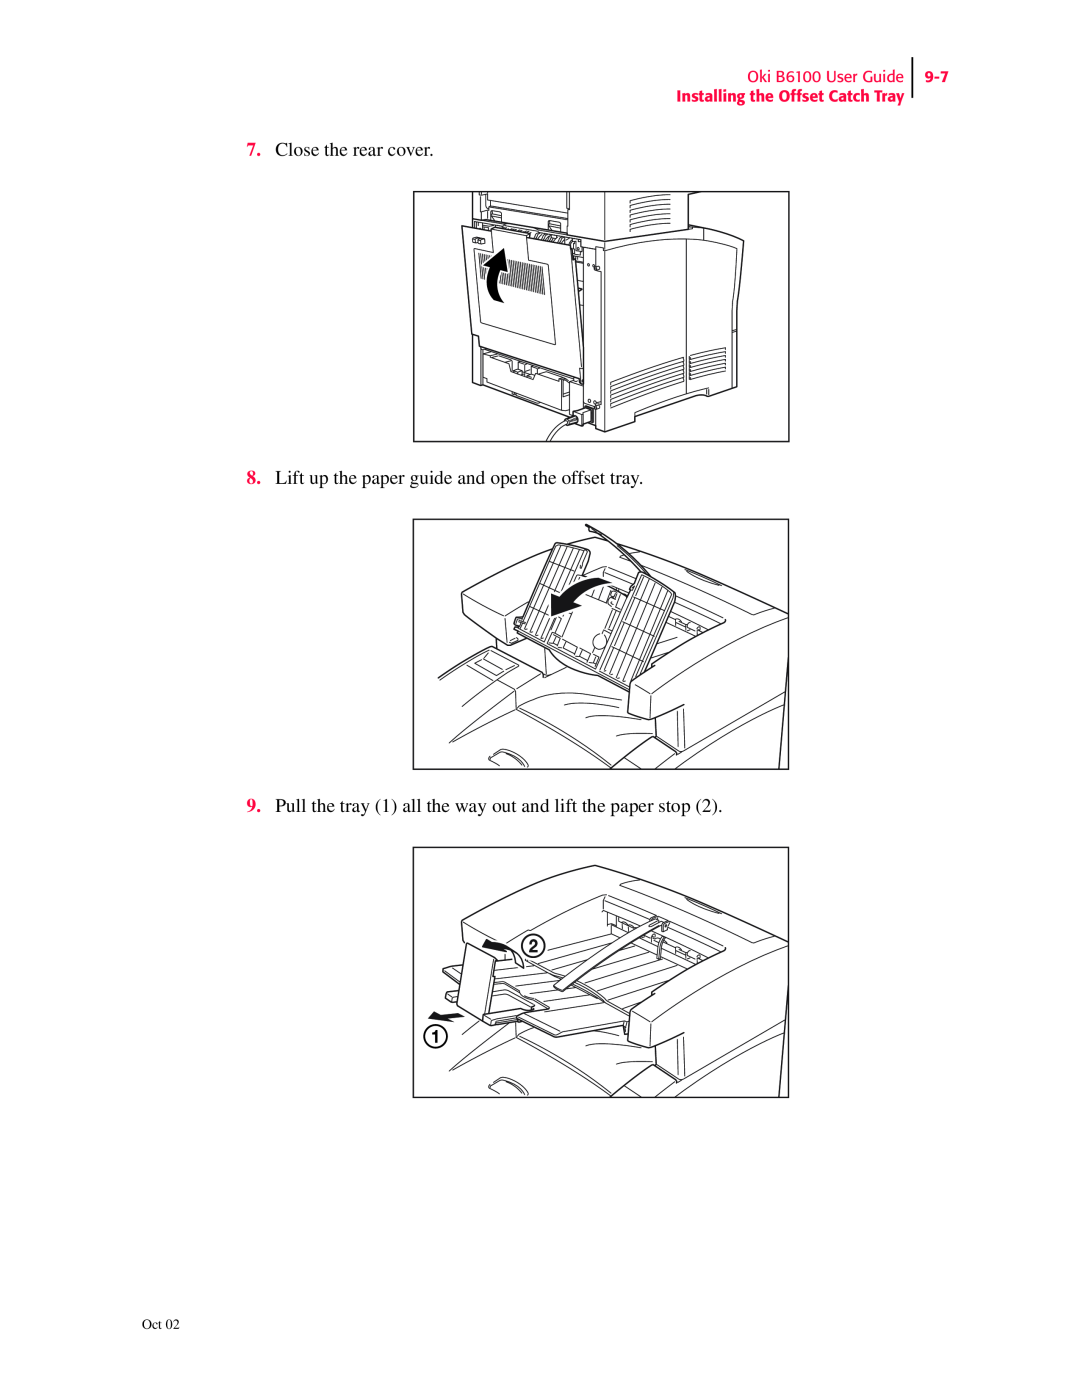 Oki 6100 manual Close the rear cover, Lift up the paper guide and open the offset tray 